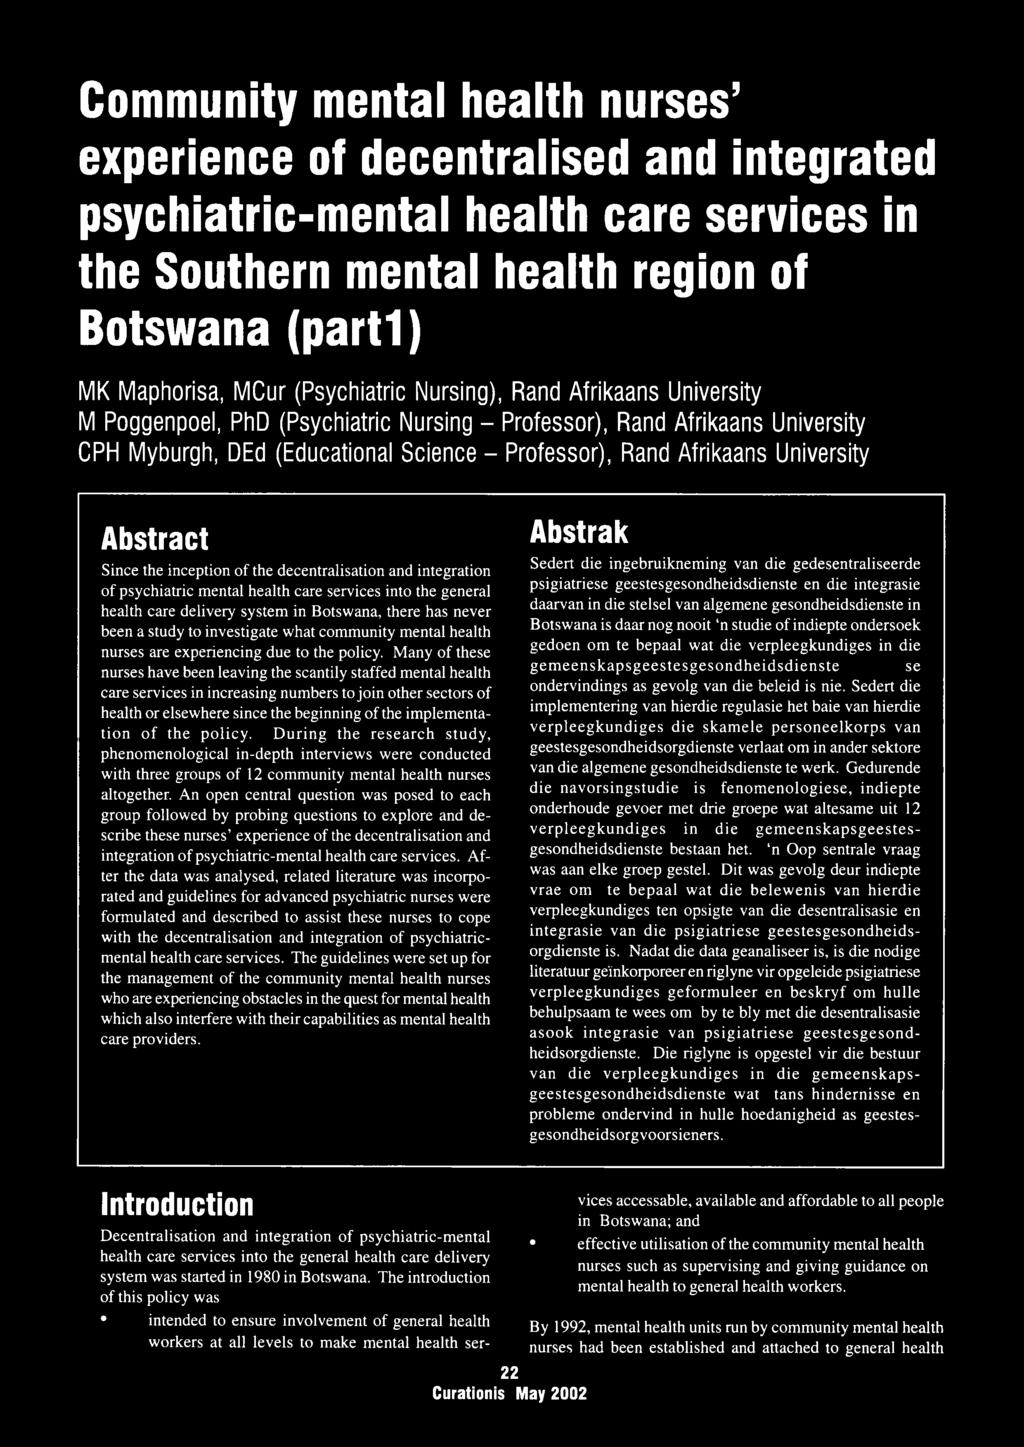 University Abstract Since the inception of the decentralisation and integration of psychiatric mental health care services into the general health care delivery system in Botswana, there has never